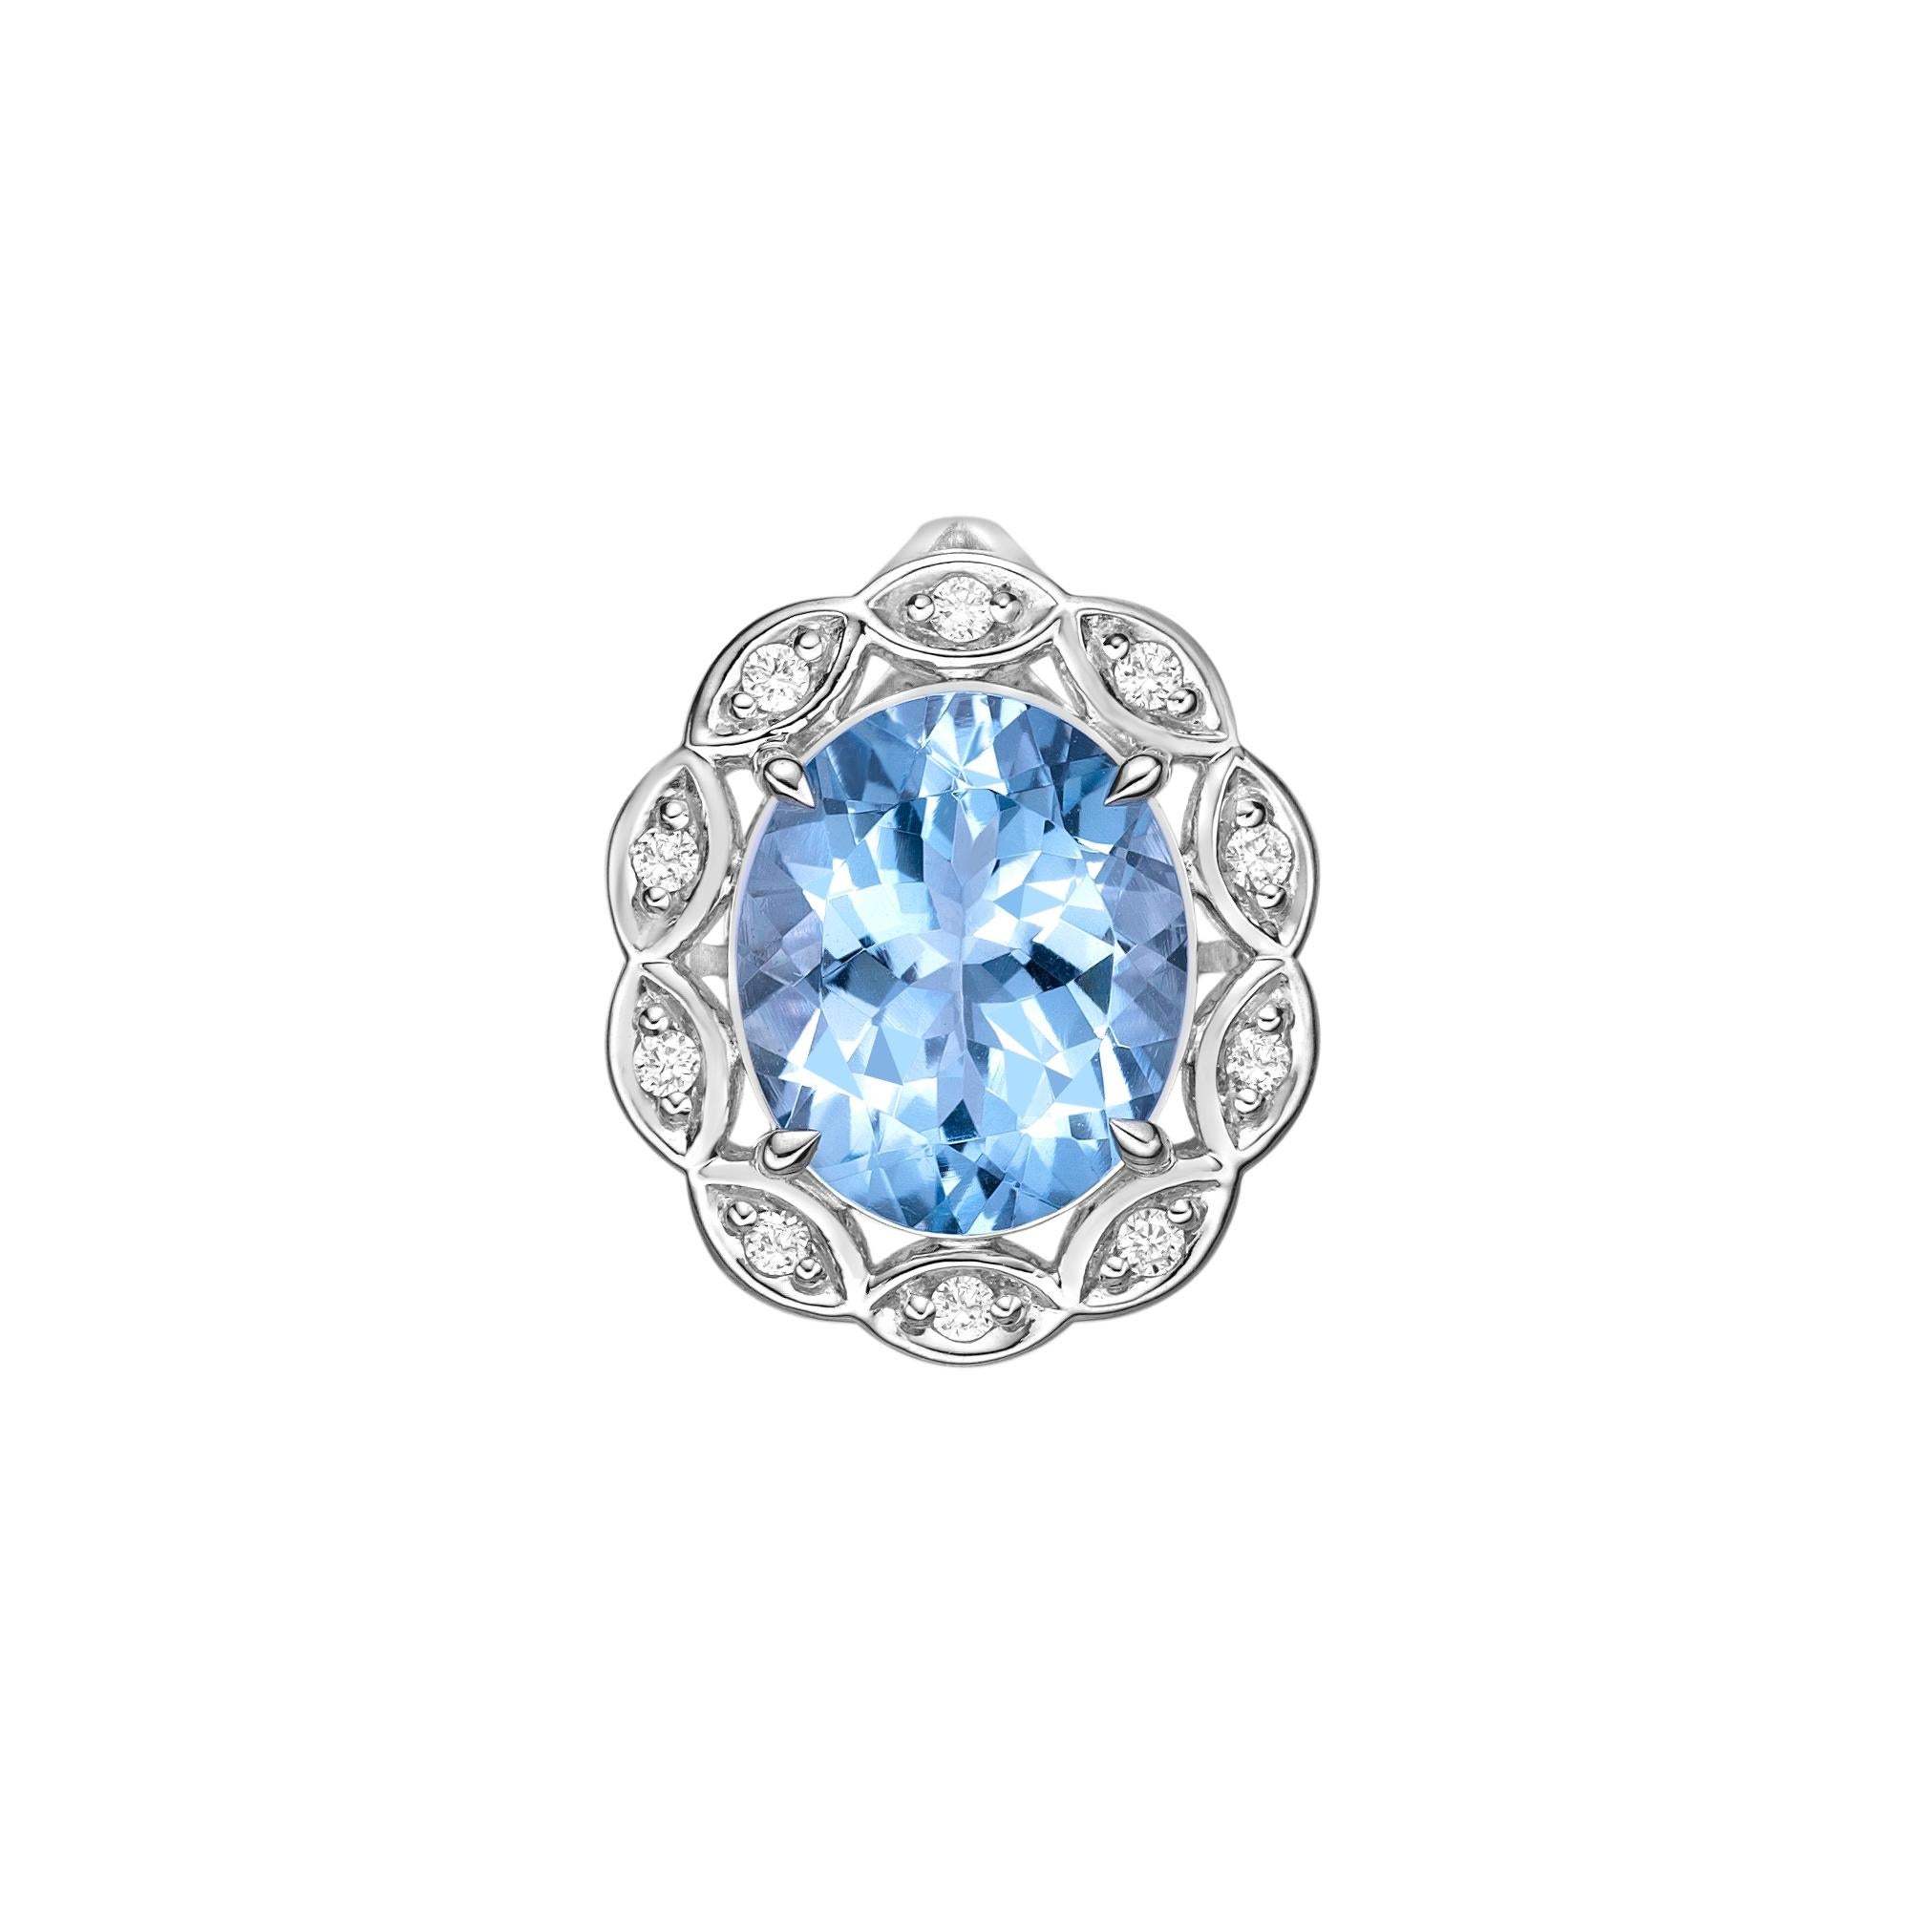 Elevate your look with our stunning Santa Maria aquamarine set, featuring a mesmerizing ice blue hue that radiates elegance. Enhanced with diamonds and crafted in white gold, this ring offers a timeless allure with a touch of modern